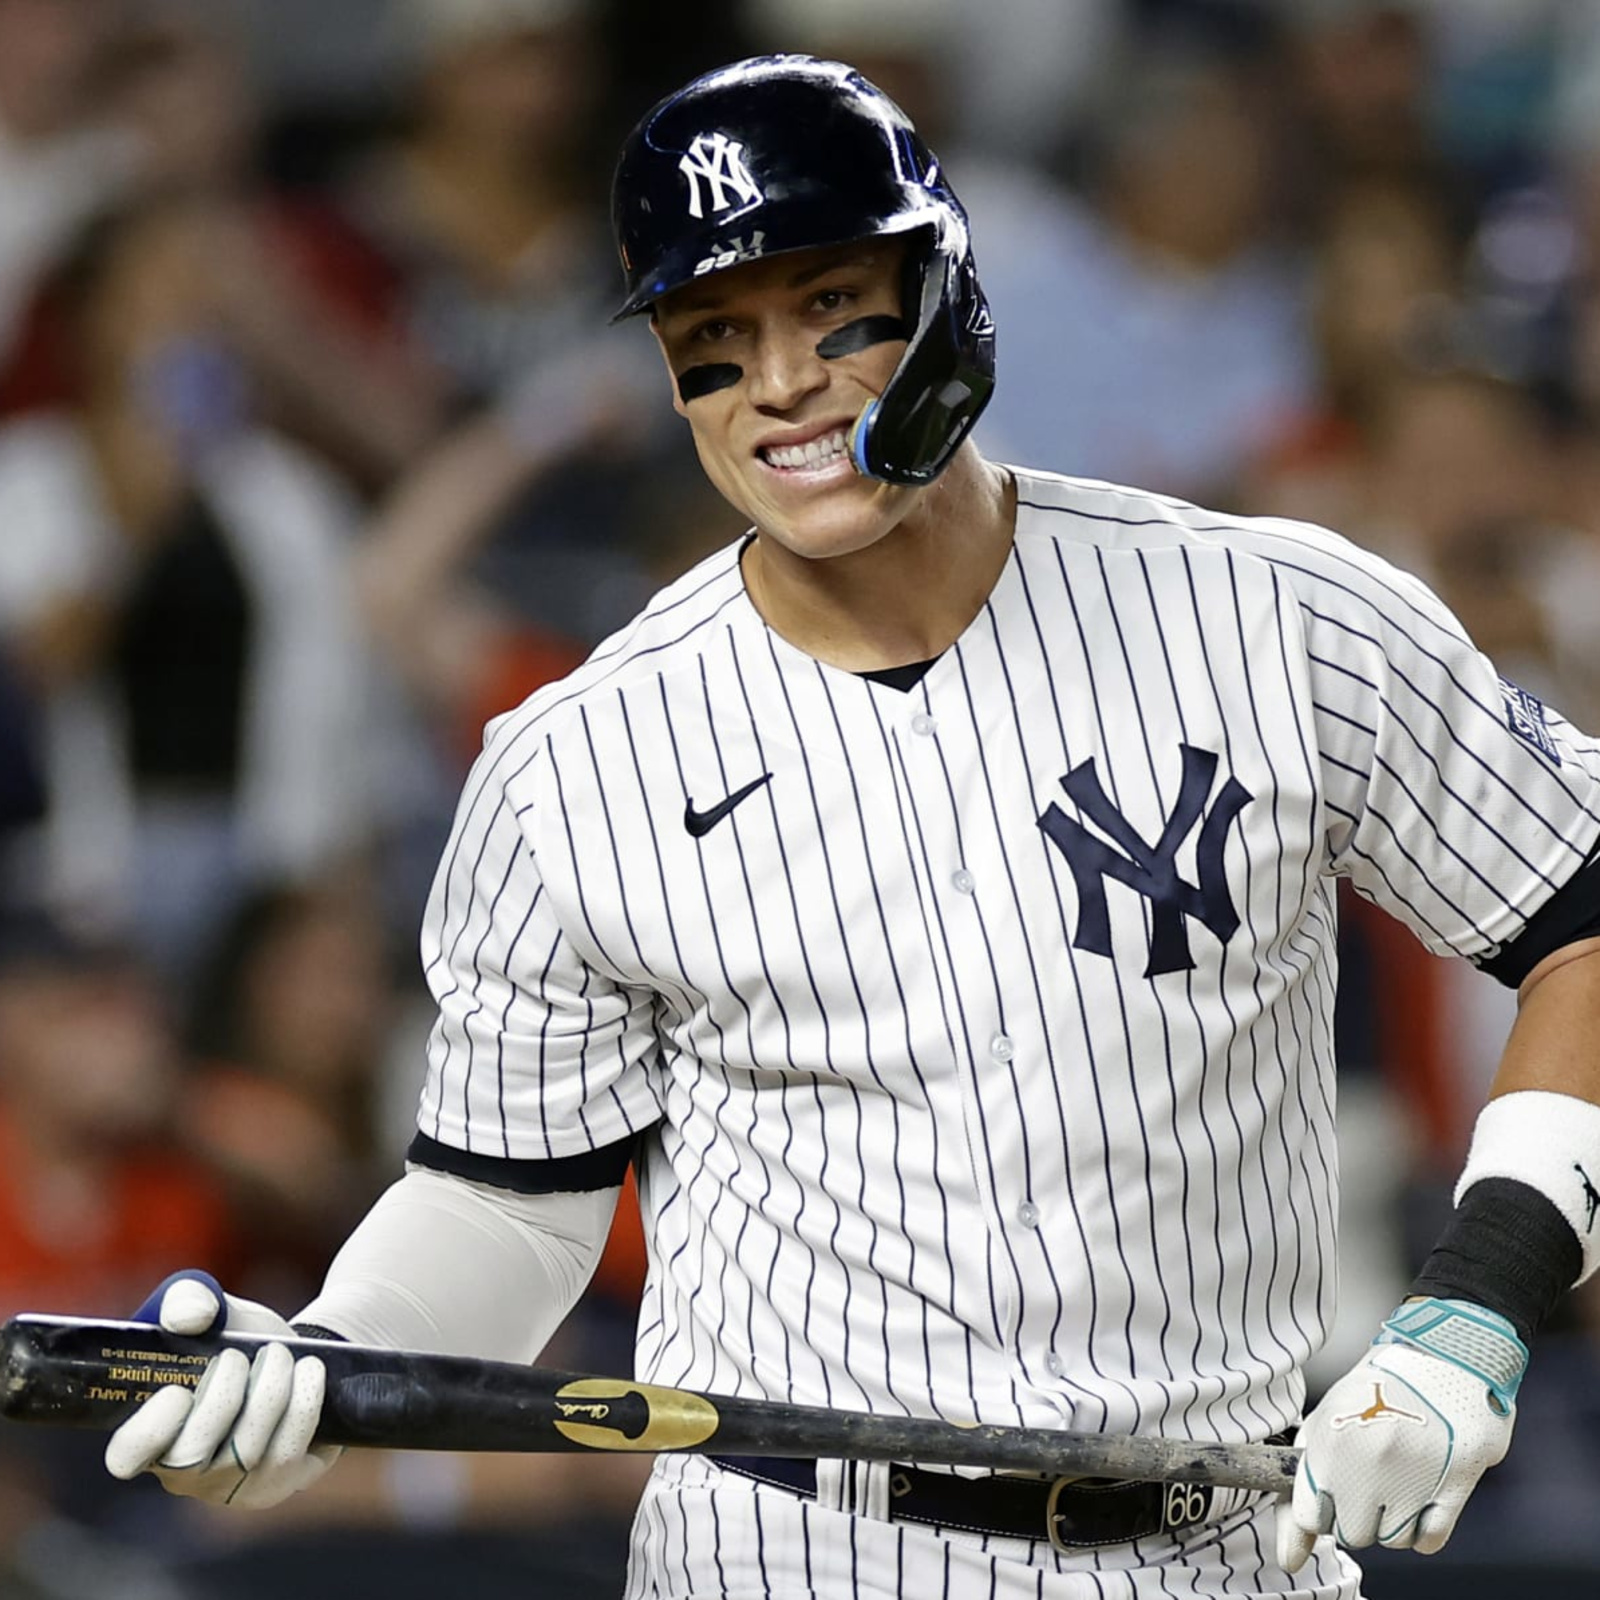 New York Yankees 2022: Scouting, Projected Lineup, Season Prediction 